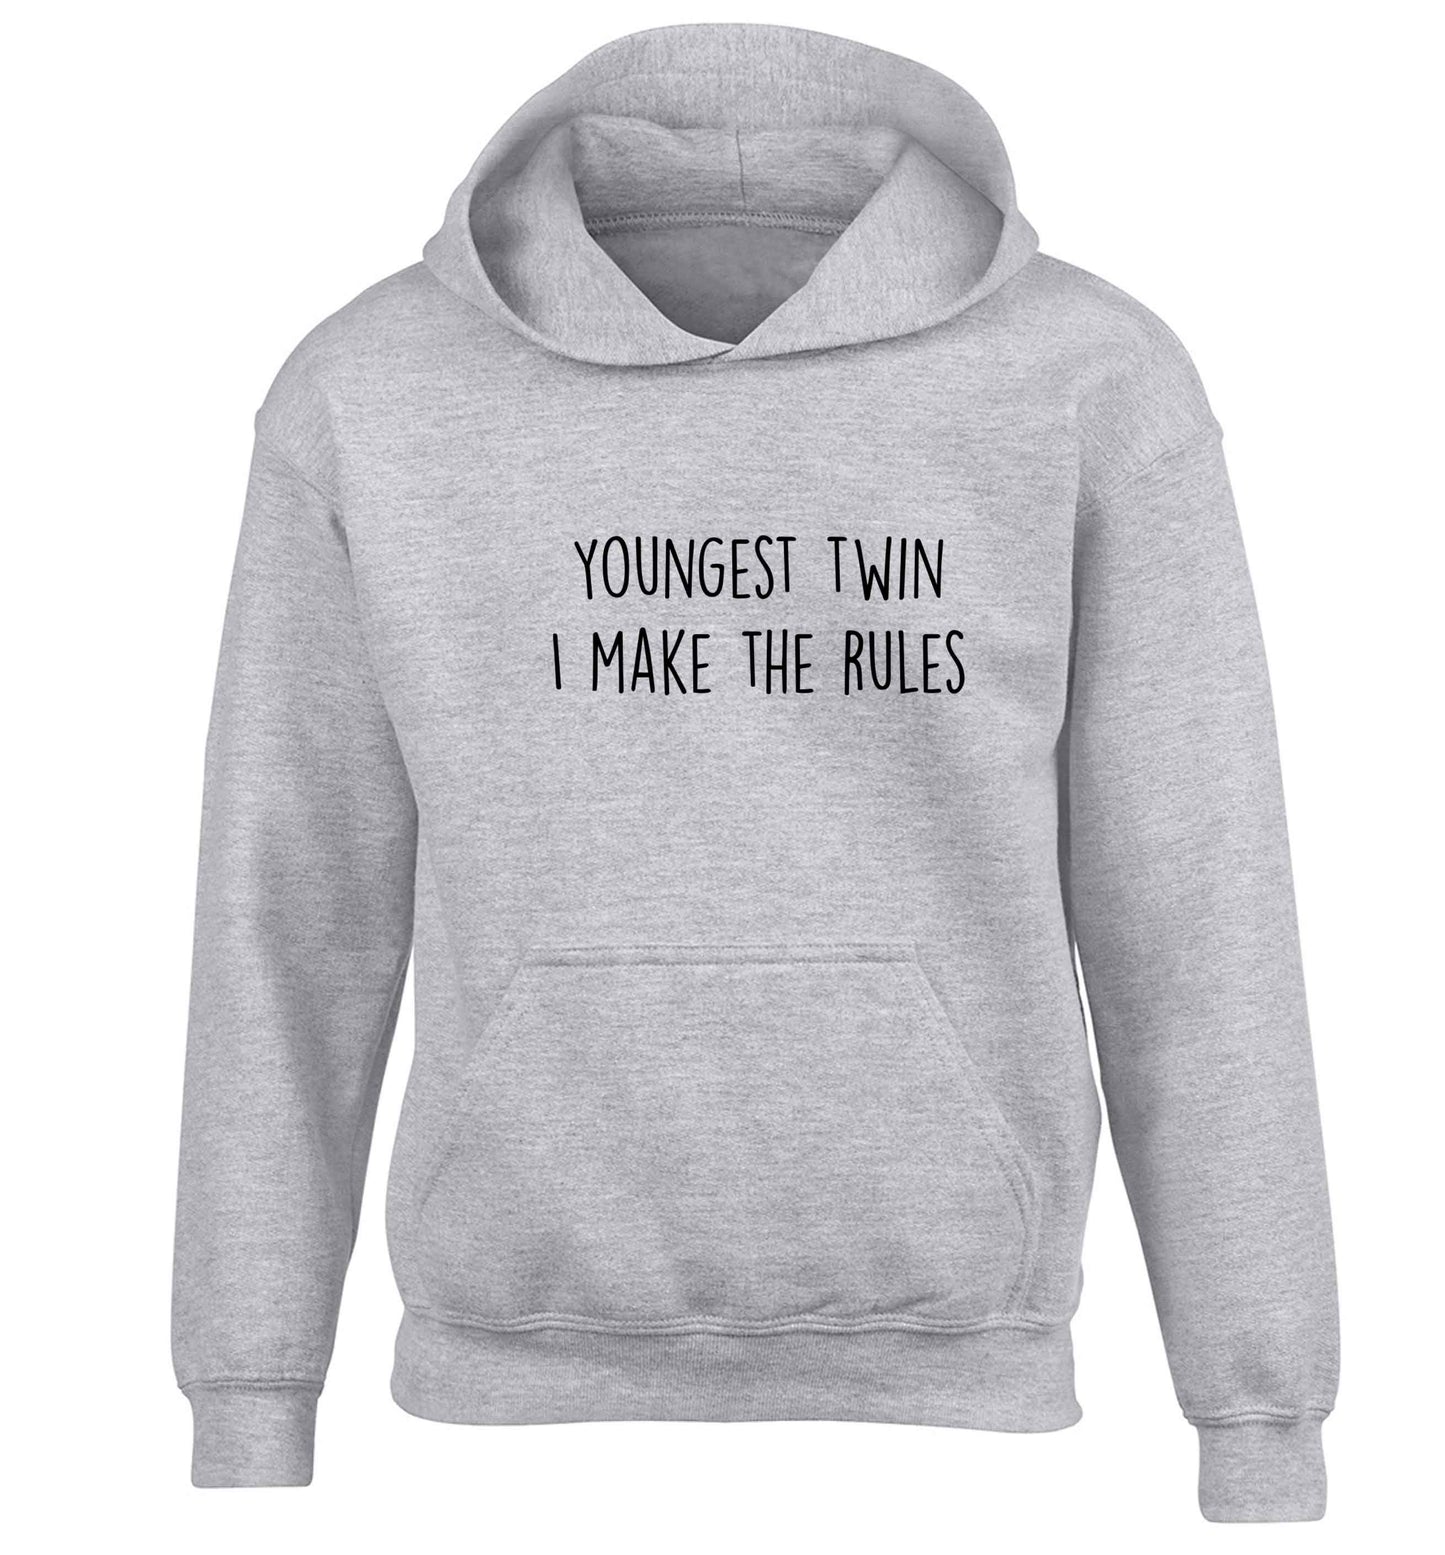 Youngest twin I make the rules children's grey hoodie 12-13 Years